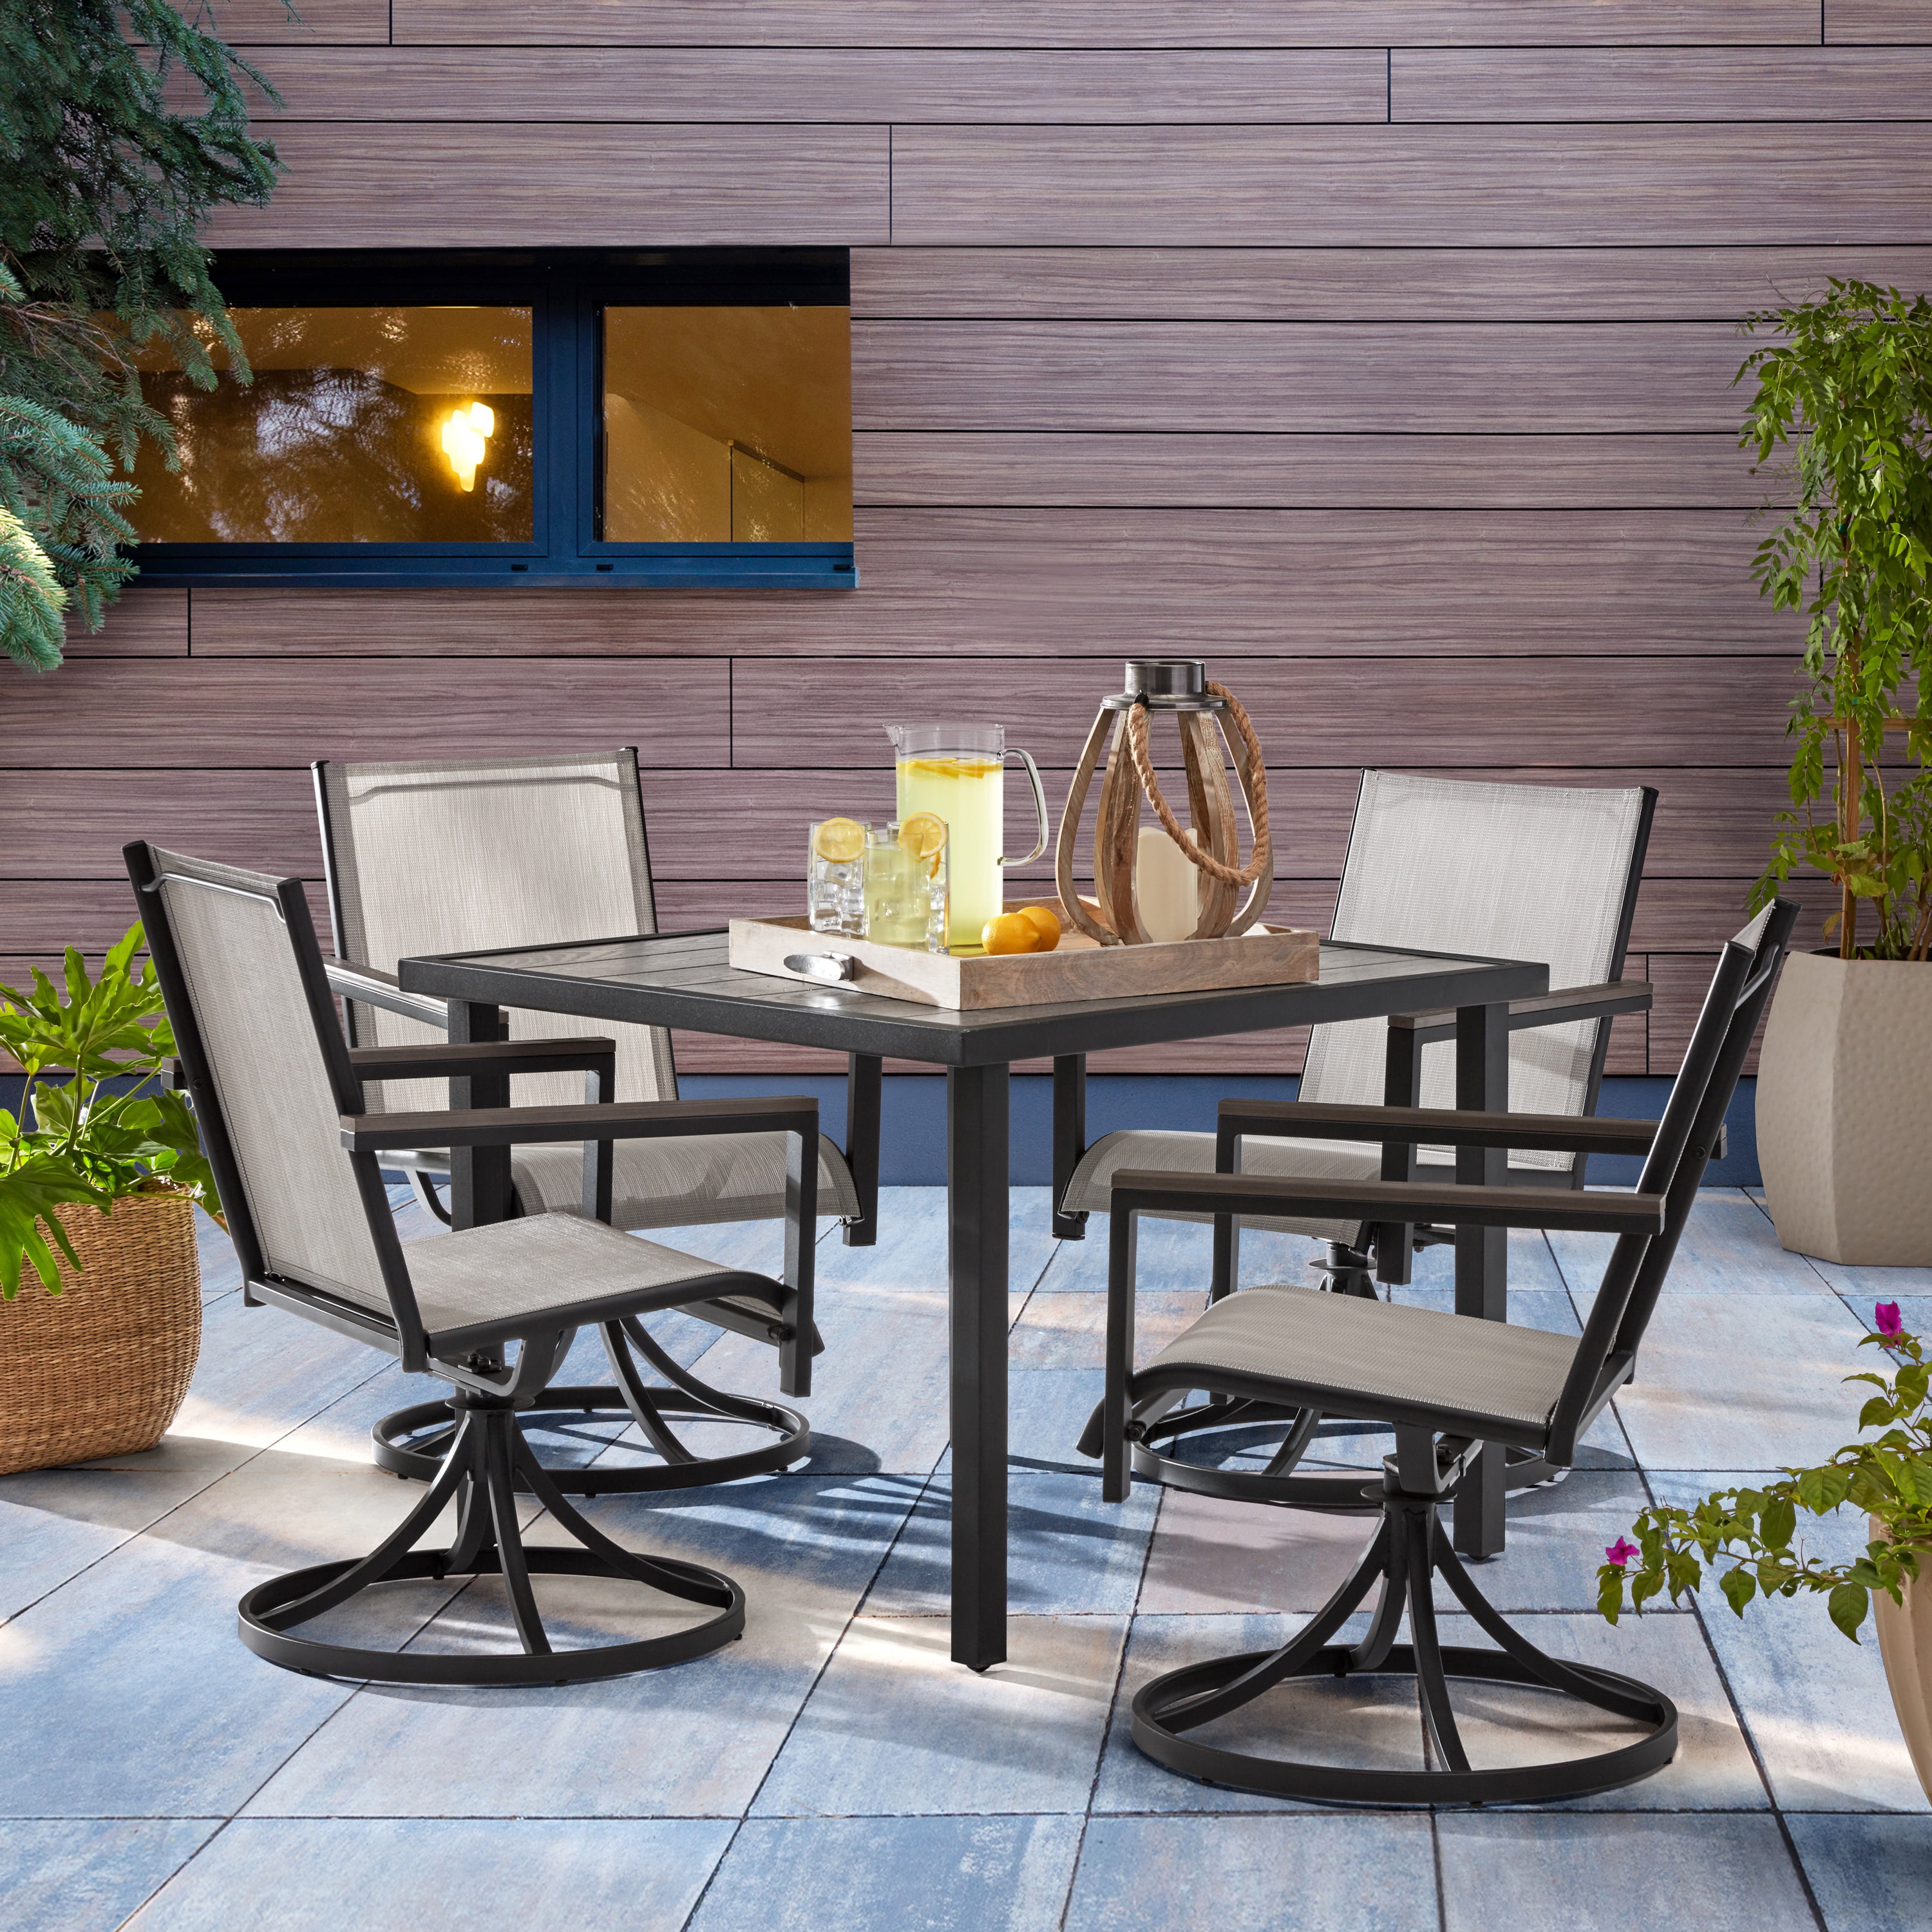 Better Homes & Gardens Brees 5-Piece Sling Swivel Dining Set on sale for  $263.62